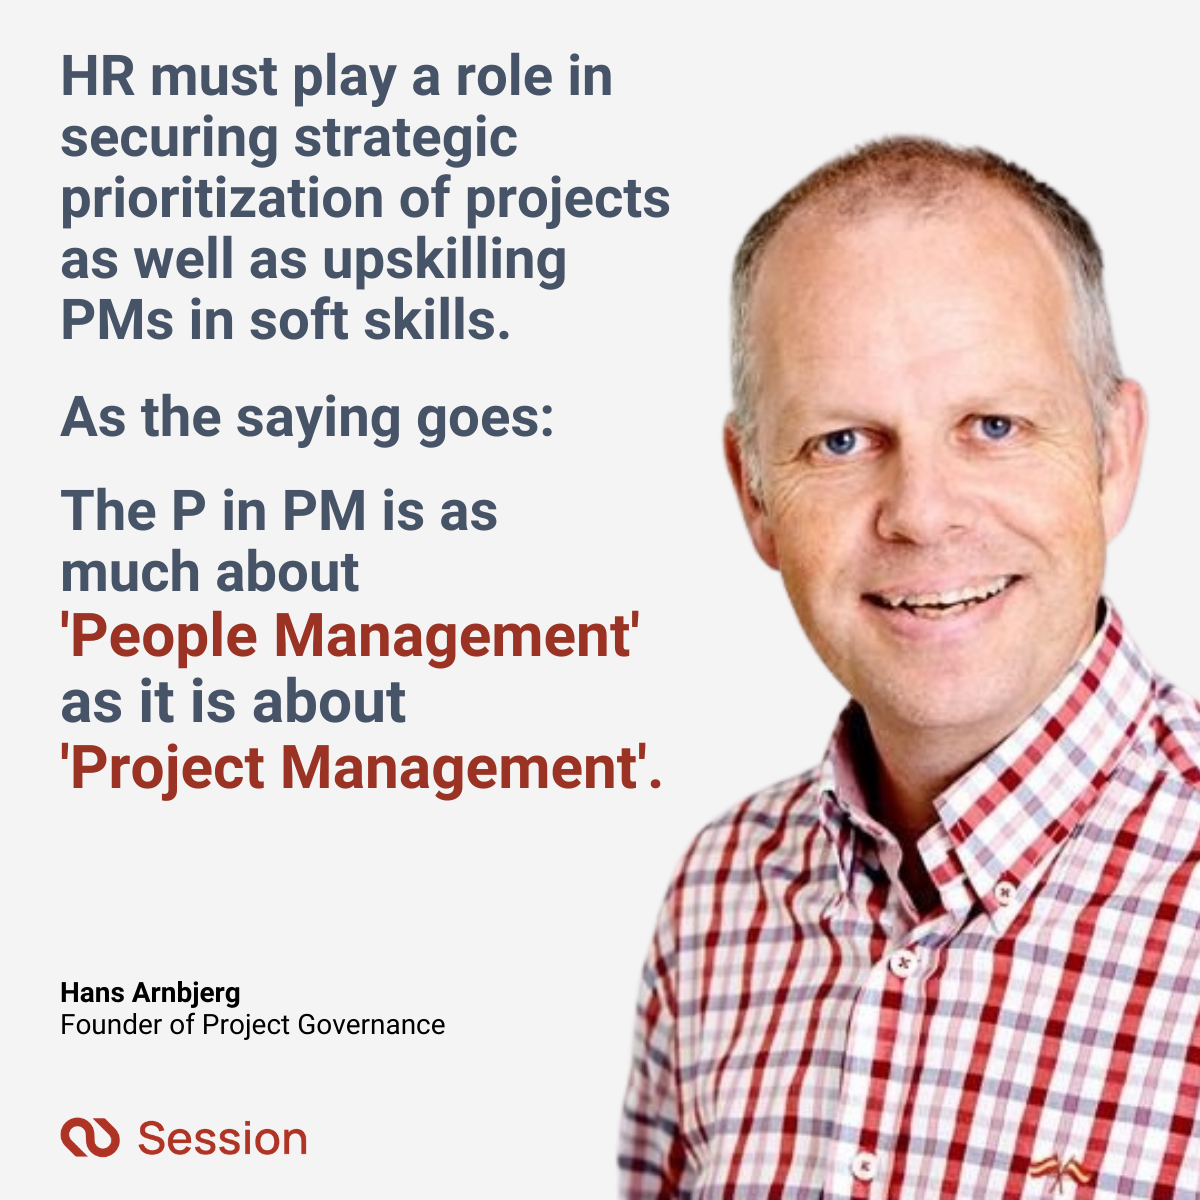 Picture of Hans Arnbjerg with his quote: HR must play a role in securing strategic prioritization of projects as well as upskilling PMs in soft skills As the saying goes: The P in PM is as much about 'People Management' as it is about 'Project Management'.